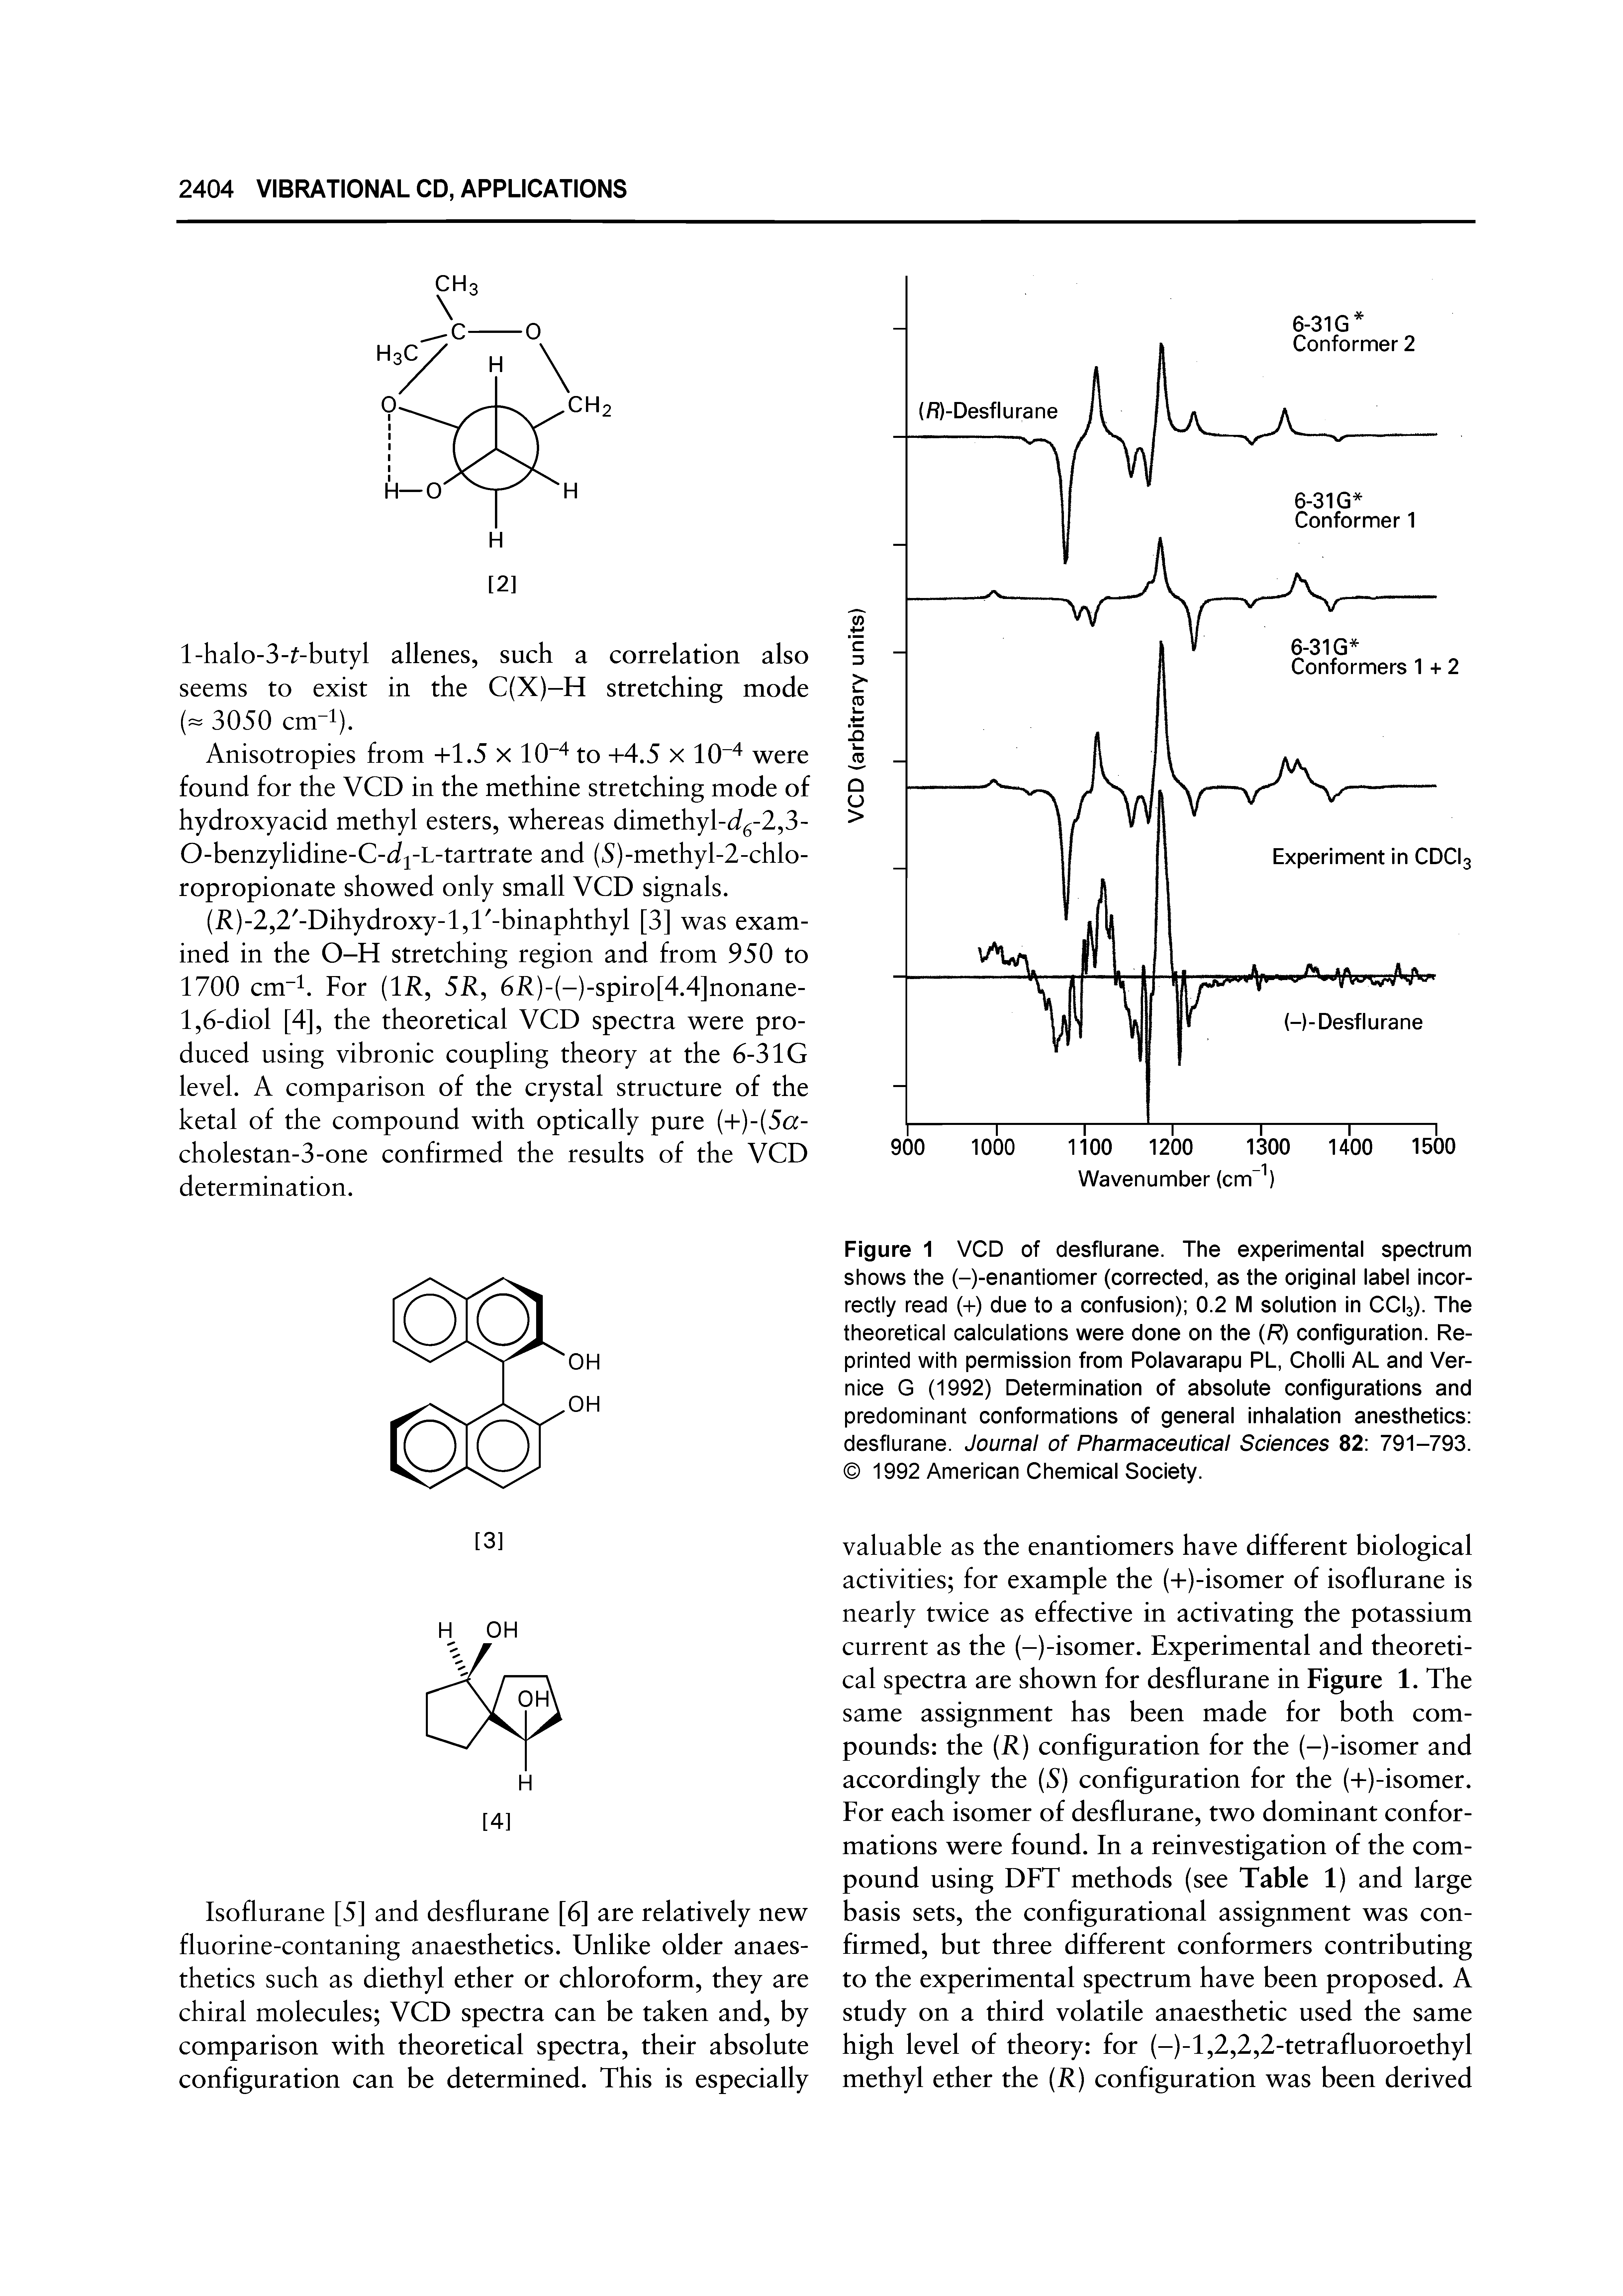 Figure 1 VCD of desflurane. The experimental spectrum shows the (-)-enantiomer (corrected, as the original label incorrectly read (+) due to a confusion) 0.2 M solution in CCI3). The theoretical calculations were done on the (R) configuration. Reprinted with permission from Polavarapu PL, Cholli AL and Ver-nice G (1992) Determination of absolute configurations and predominant conformations of general inhalation anesthetics desflurane. Journal of Pharmaceutical Sciences 82 791-793. 1992 American Chemical Society.